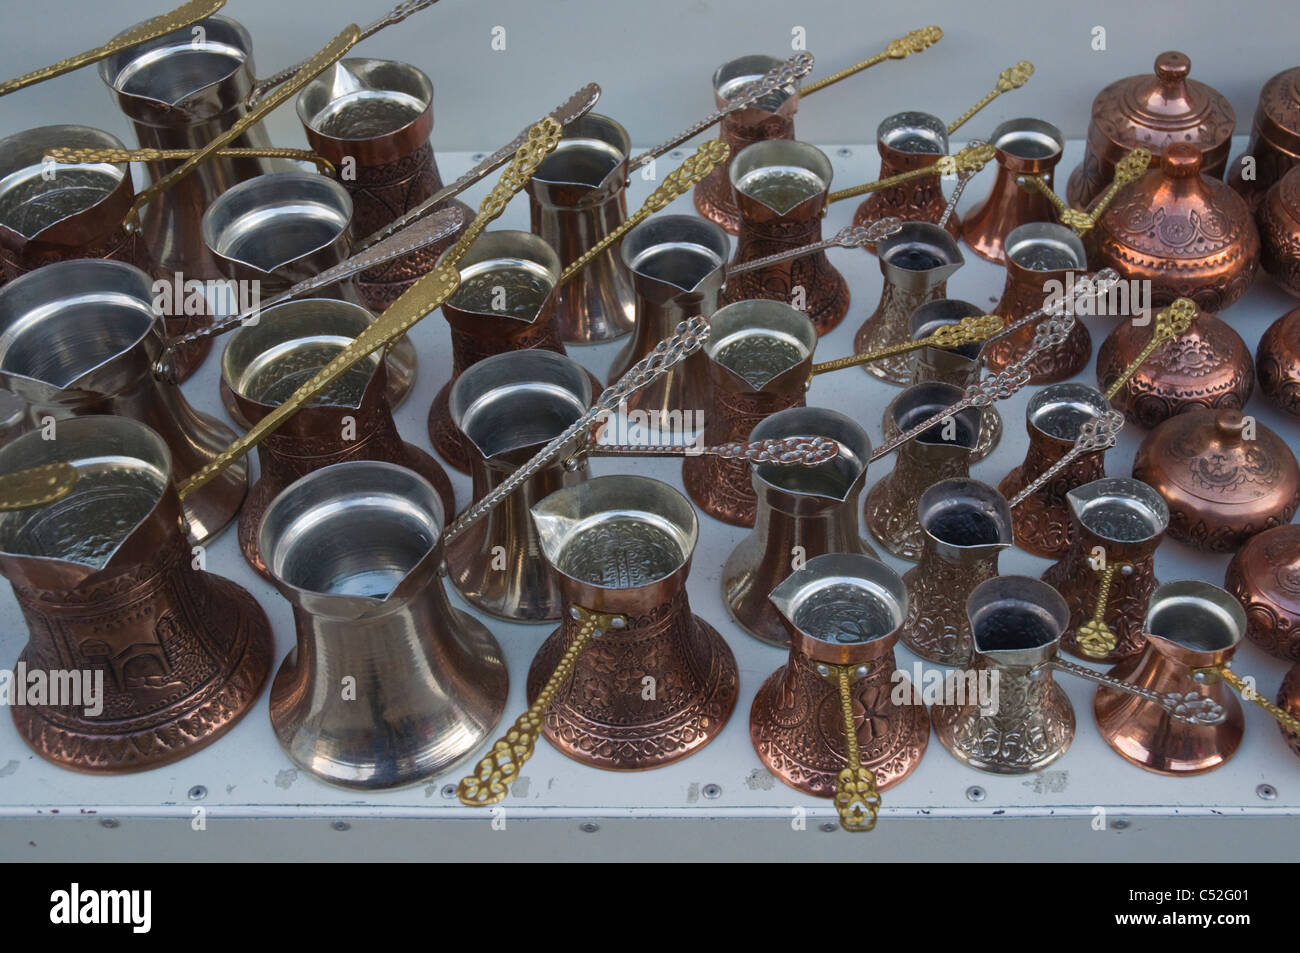 Traditional copper coffee brewing pots Mostar city Bosnia and Herzegovina Europe Stock Photo